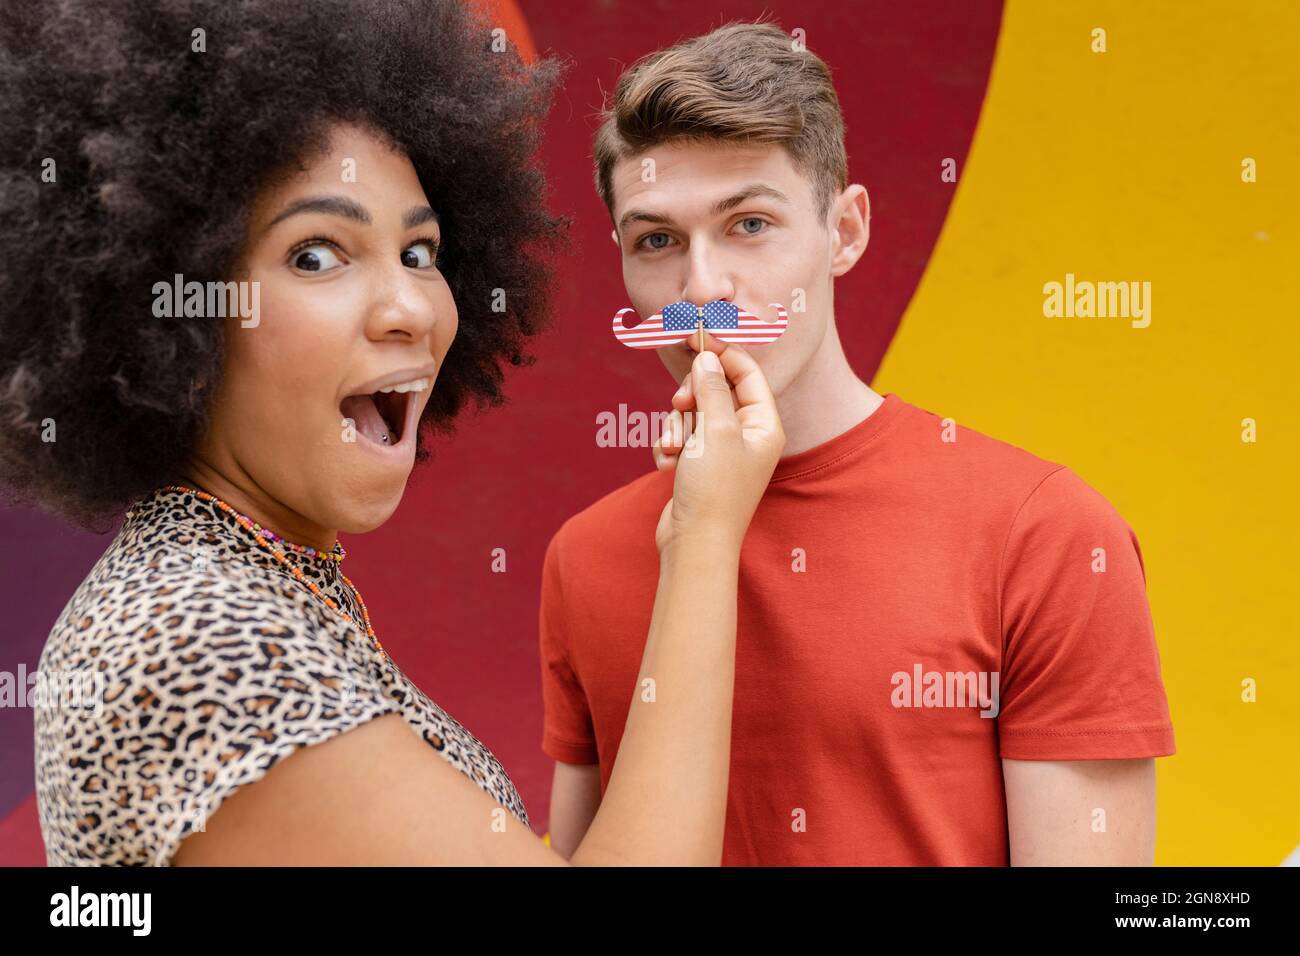 Surprised woman holding mustache prop over man's face Stock Photo